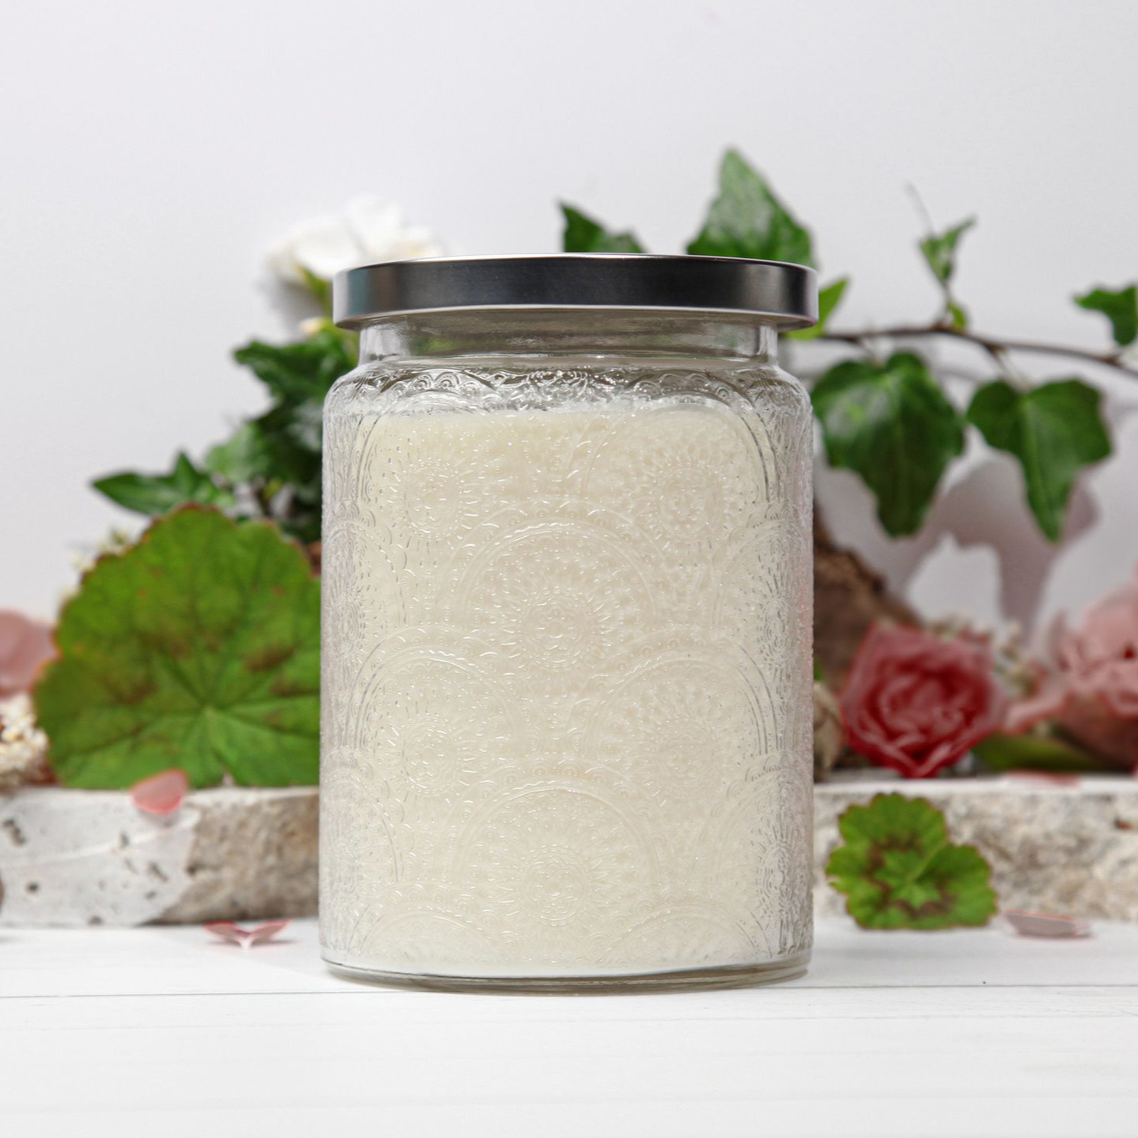 Coconut Lime Soy Candle 580g